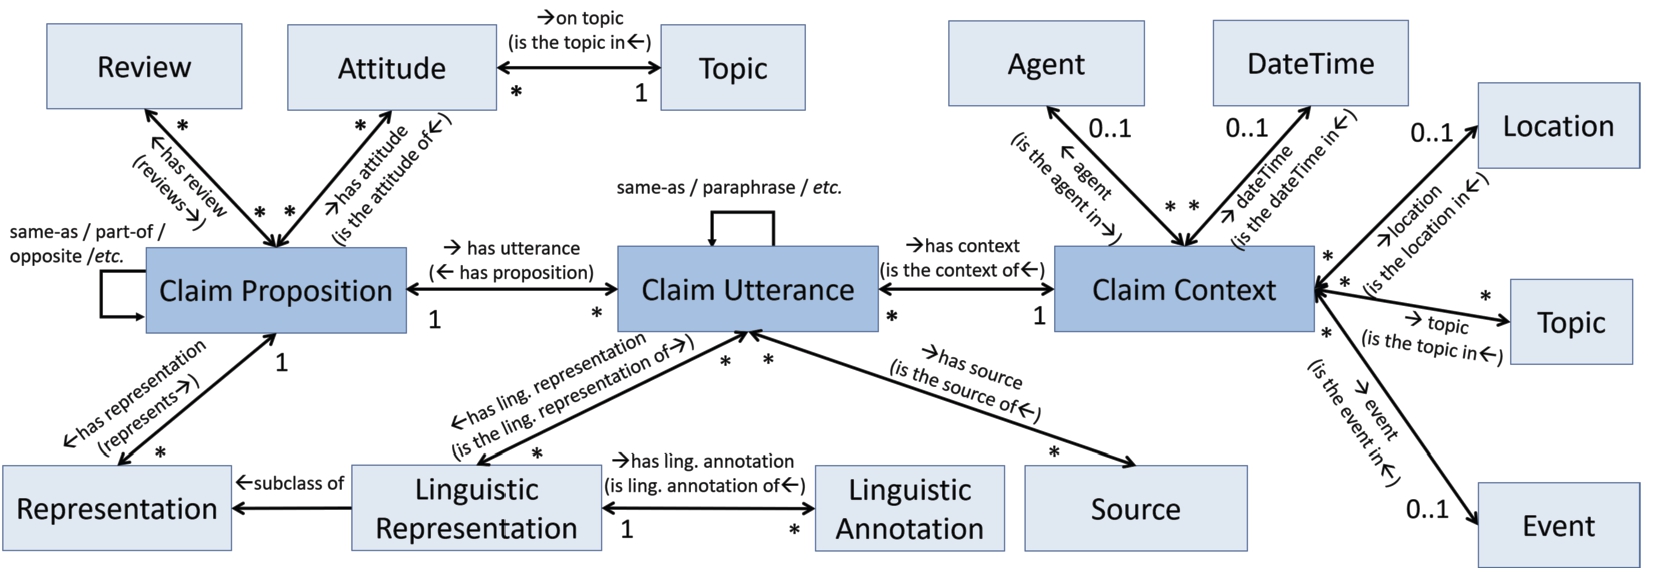 The open claims conceptual model.